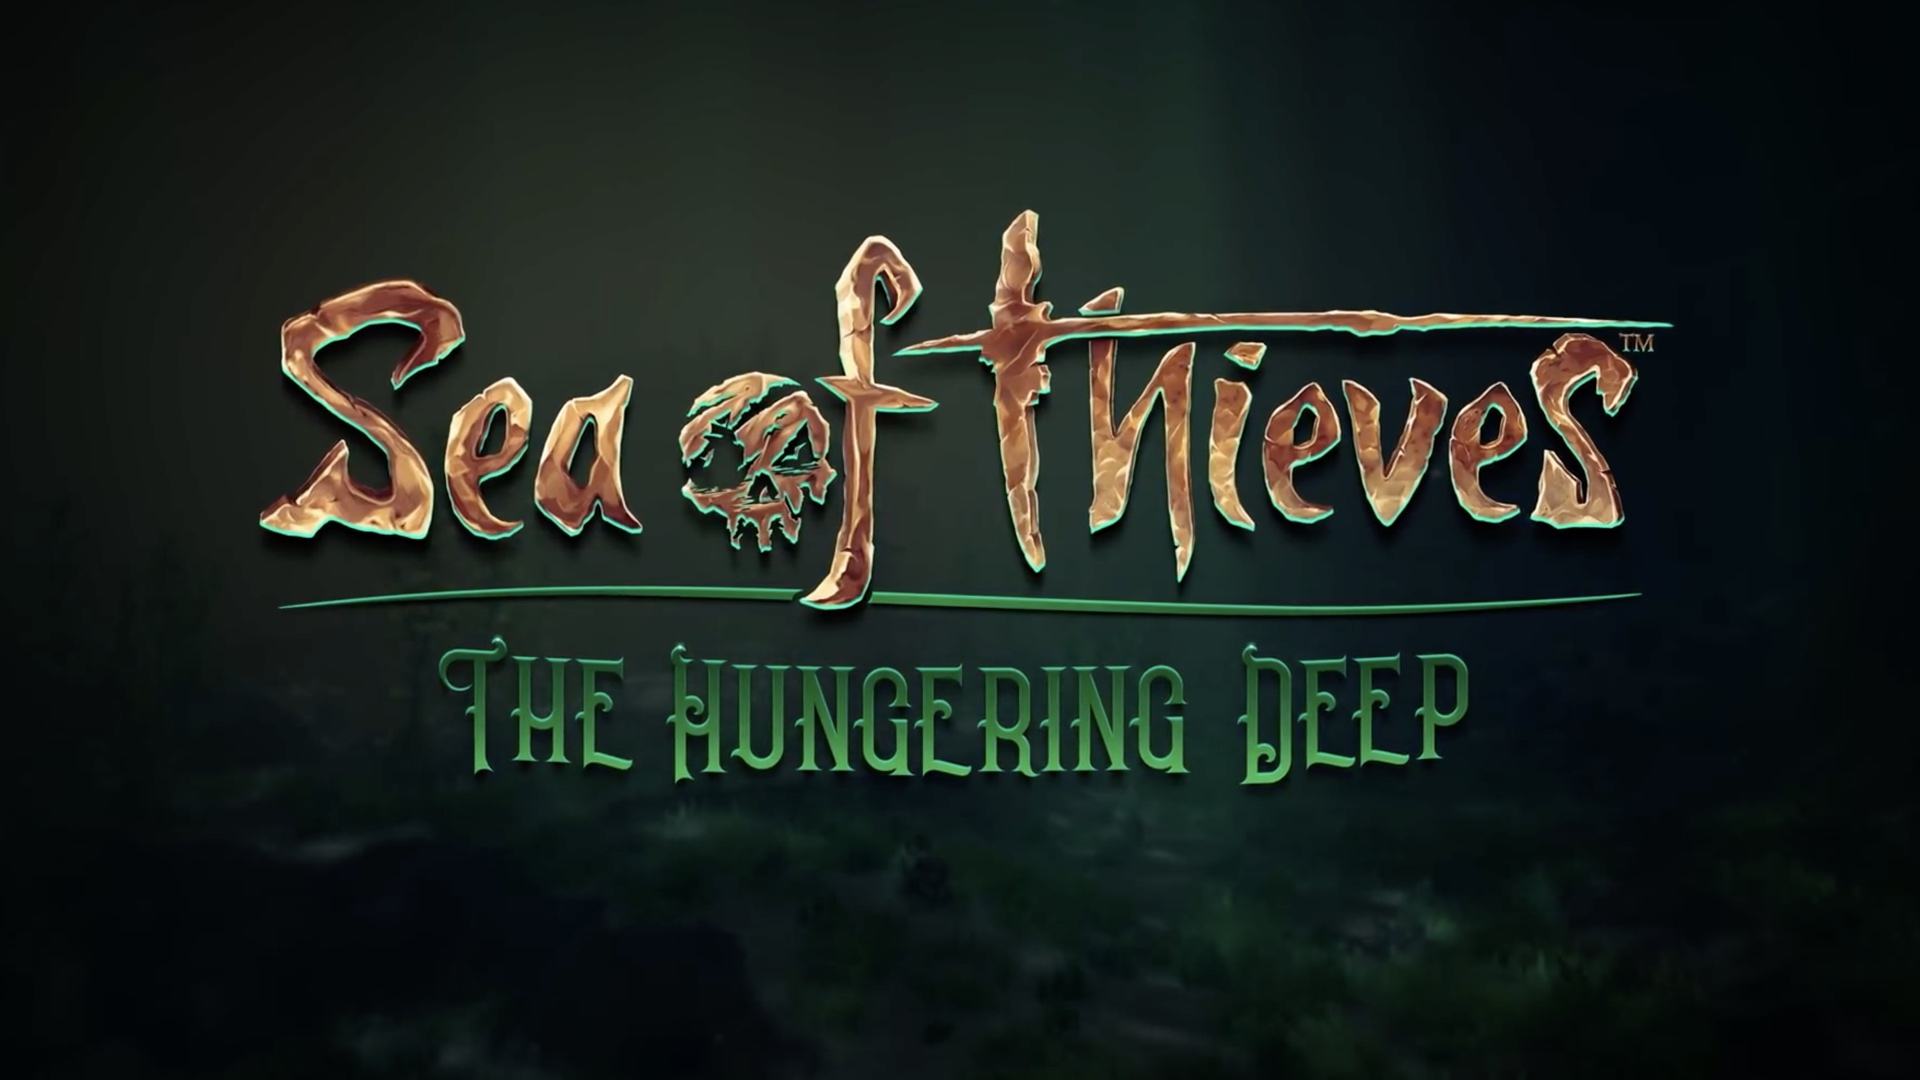 Sea of Thieves aggiornamento The Hungering Deep